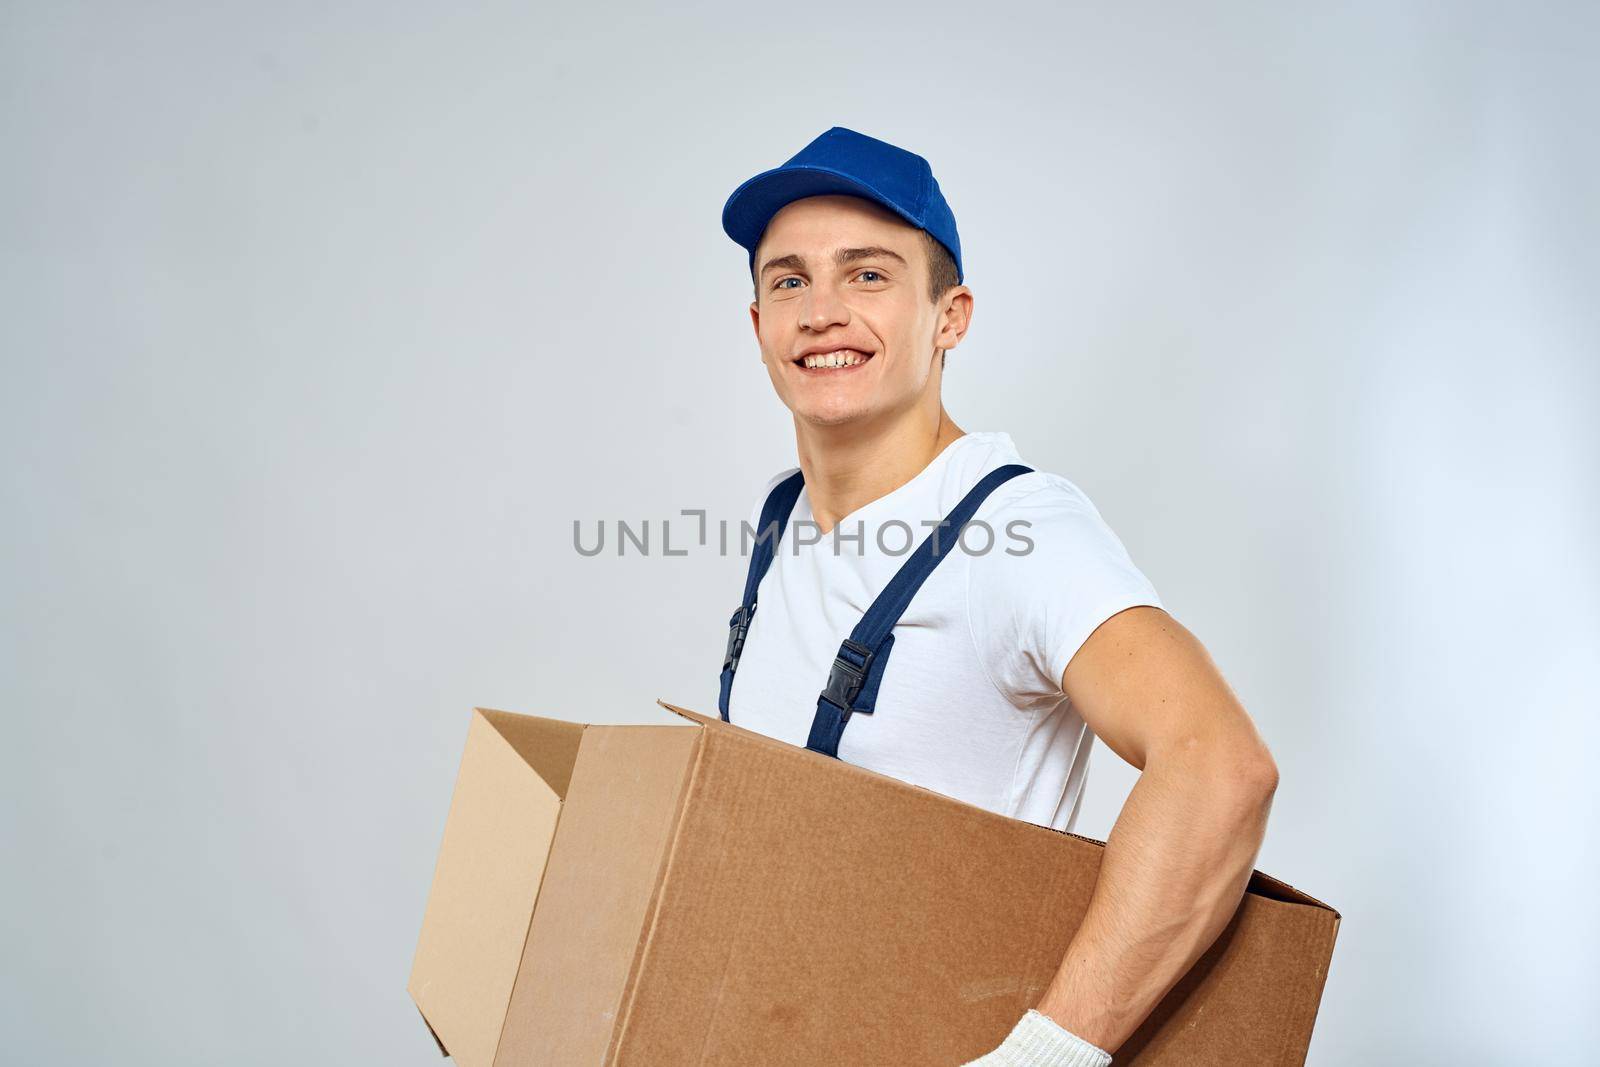 A man in a working uniform loading cardboard boxes providing services. High quality photo